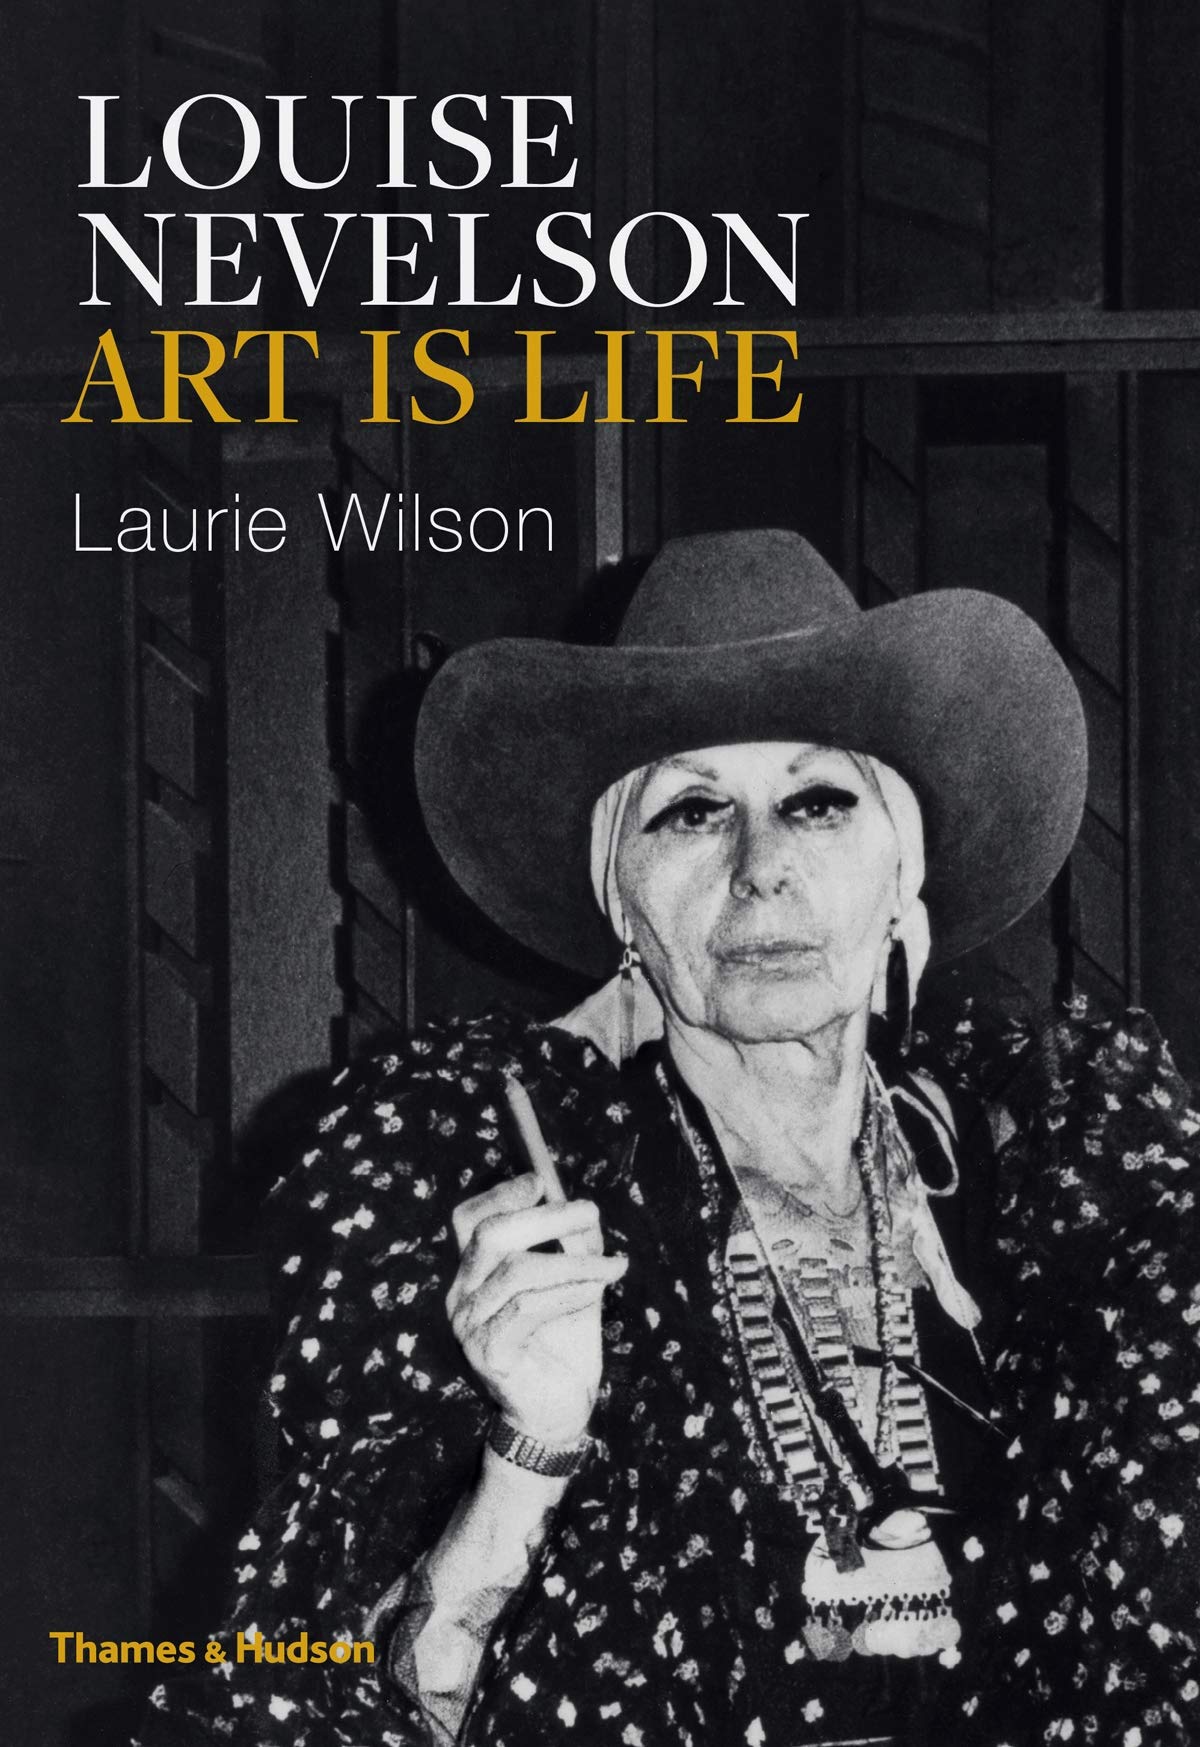 Louise Nevelson: Art is Life